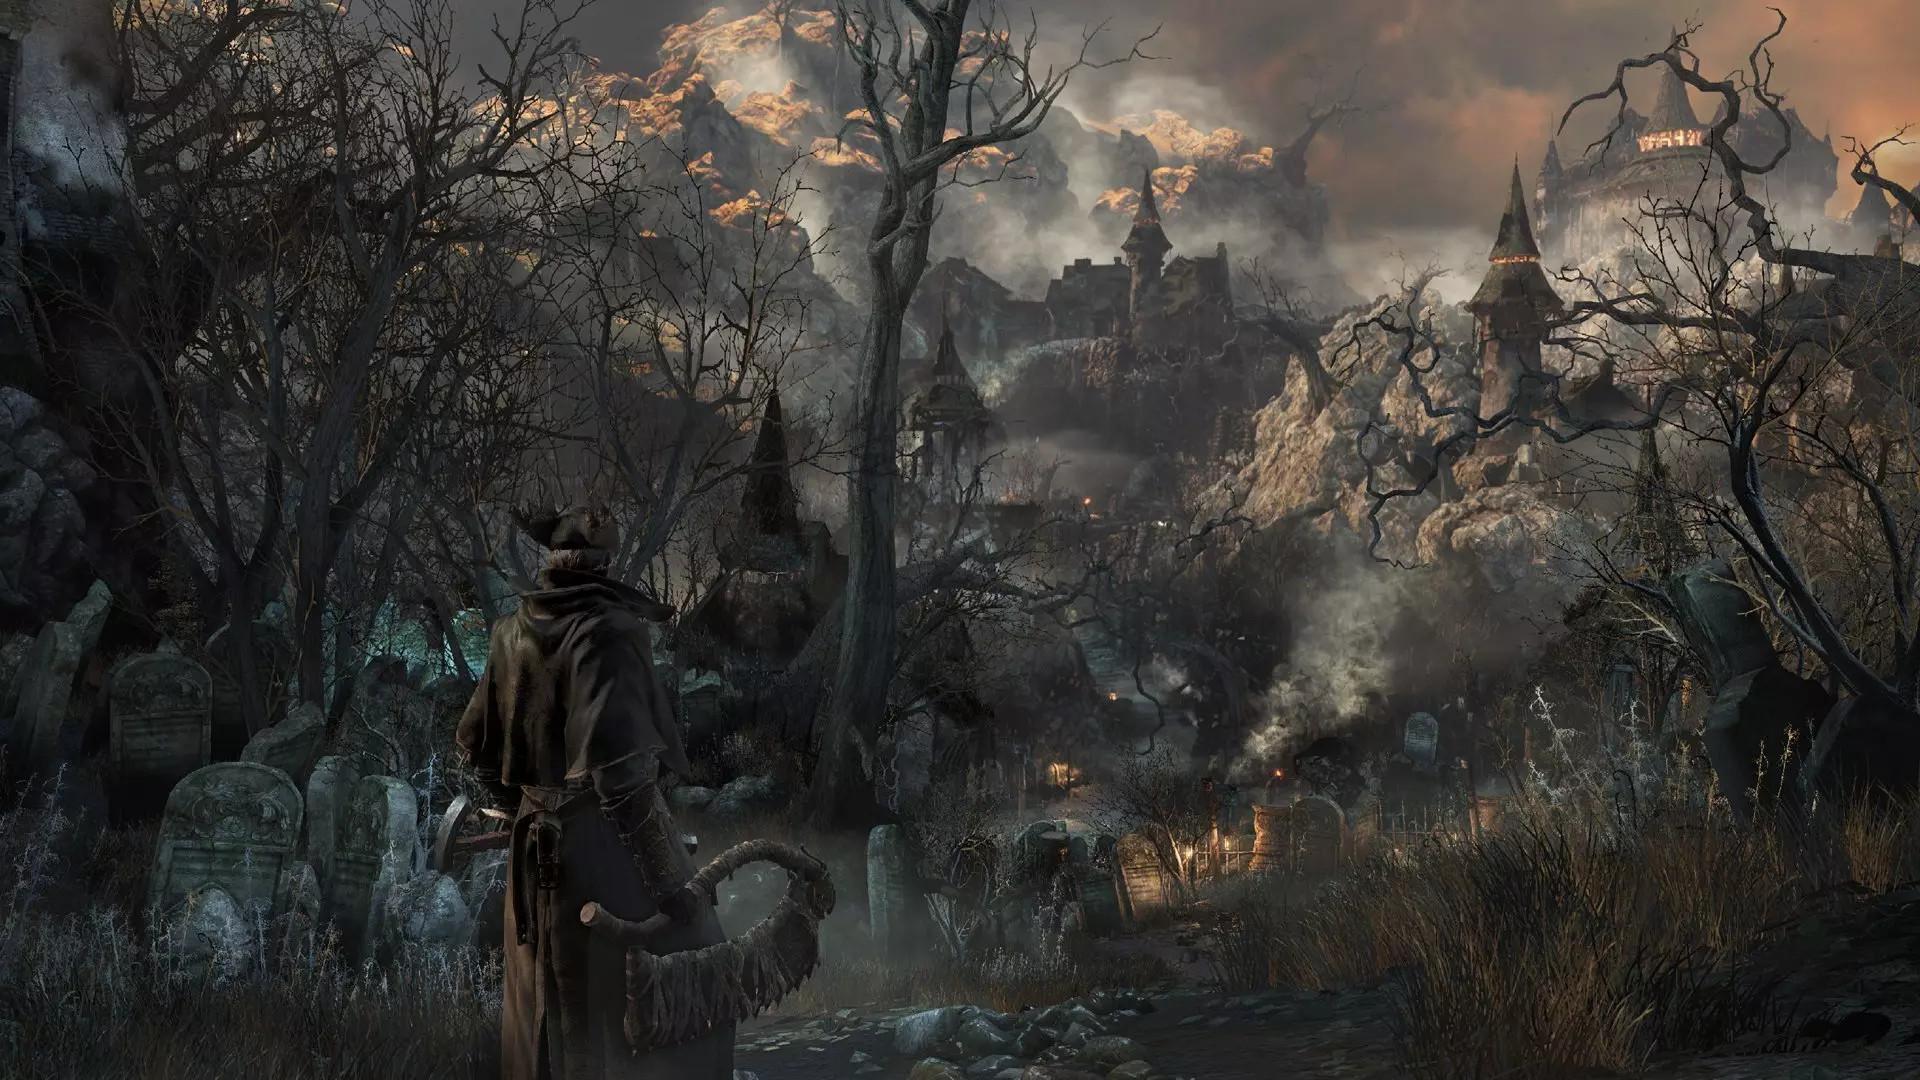 Bloodborne For PC 2022 - Will There Be An Official Port?